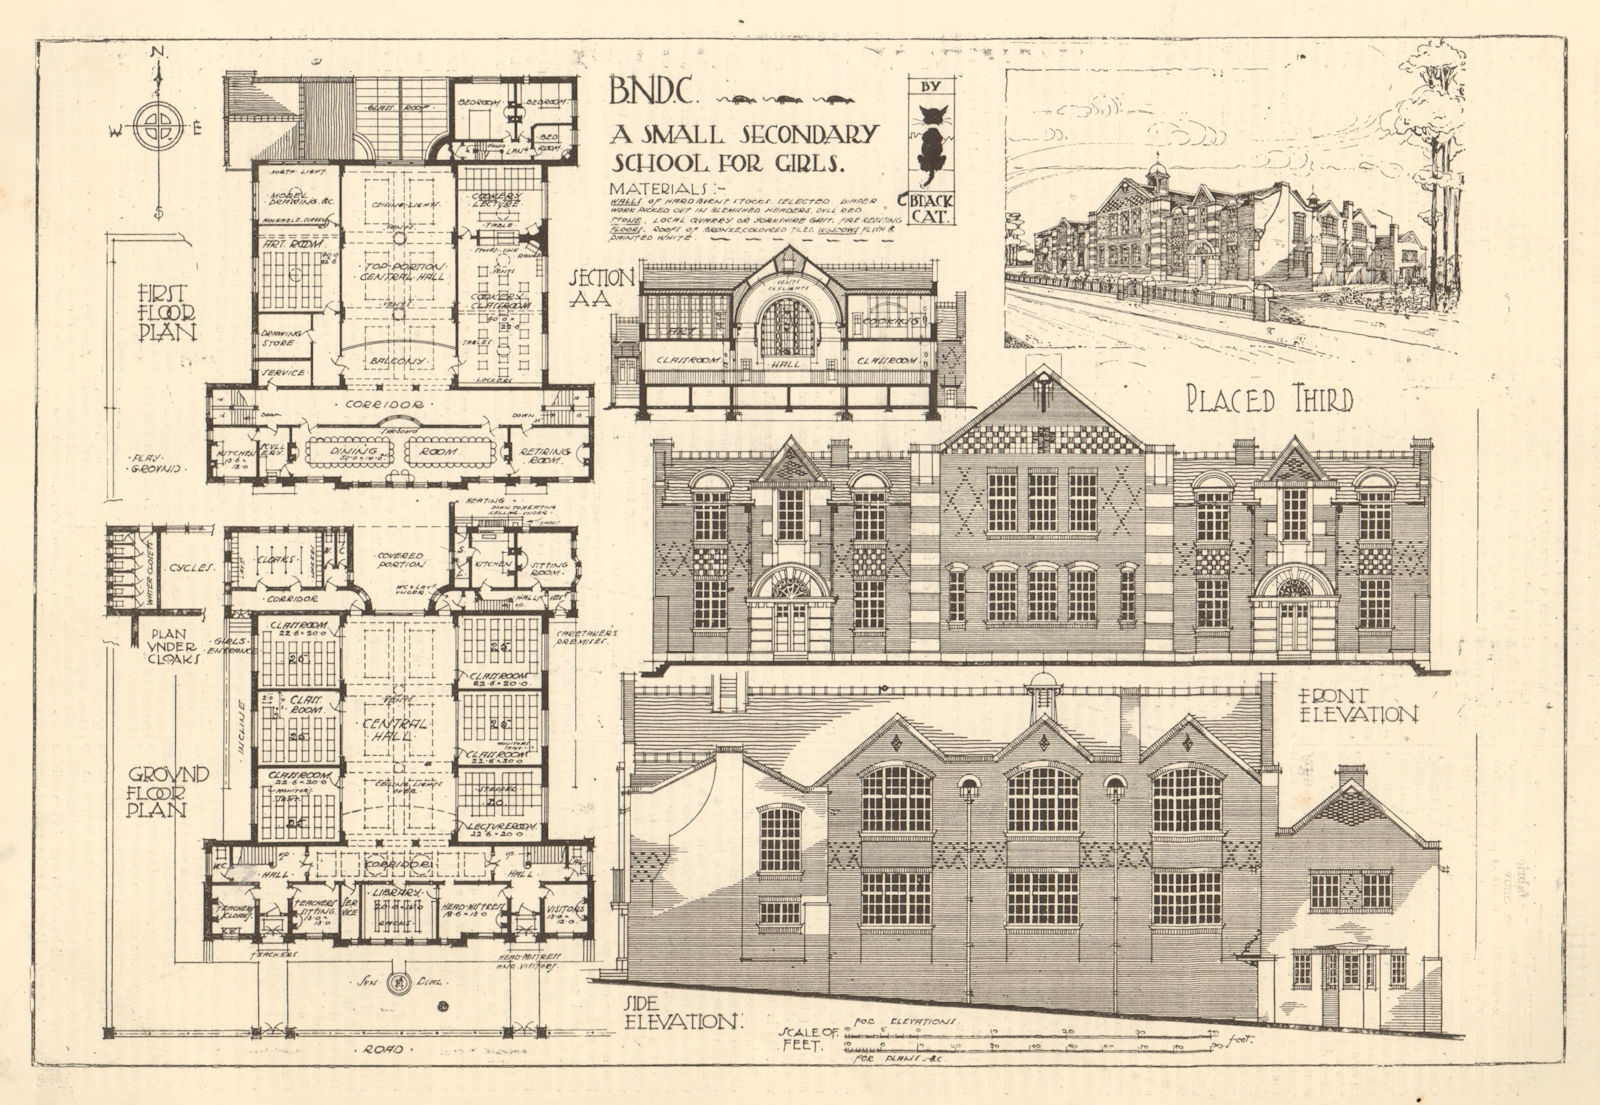 A small secondary school for girls. Elevations, section & plans 1906 old print